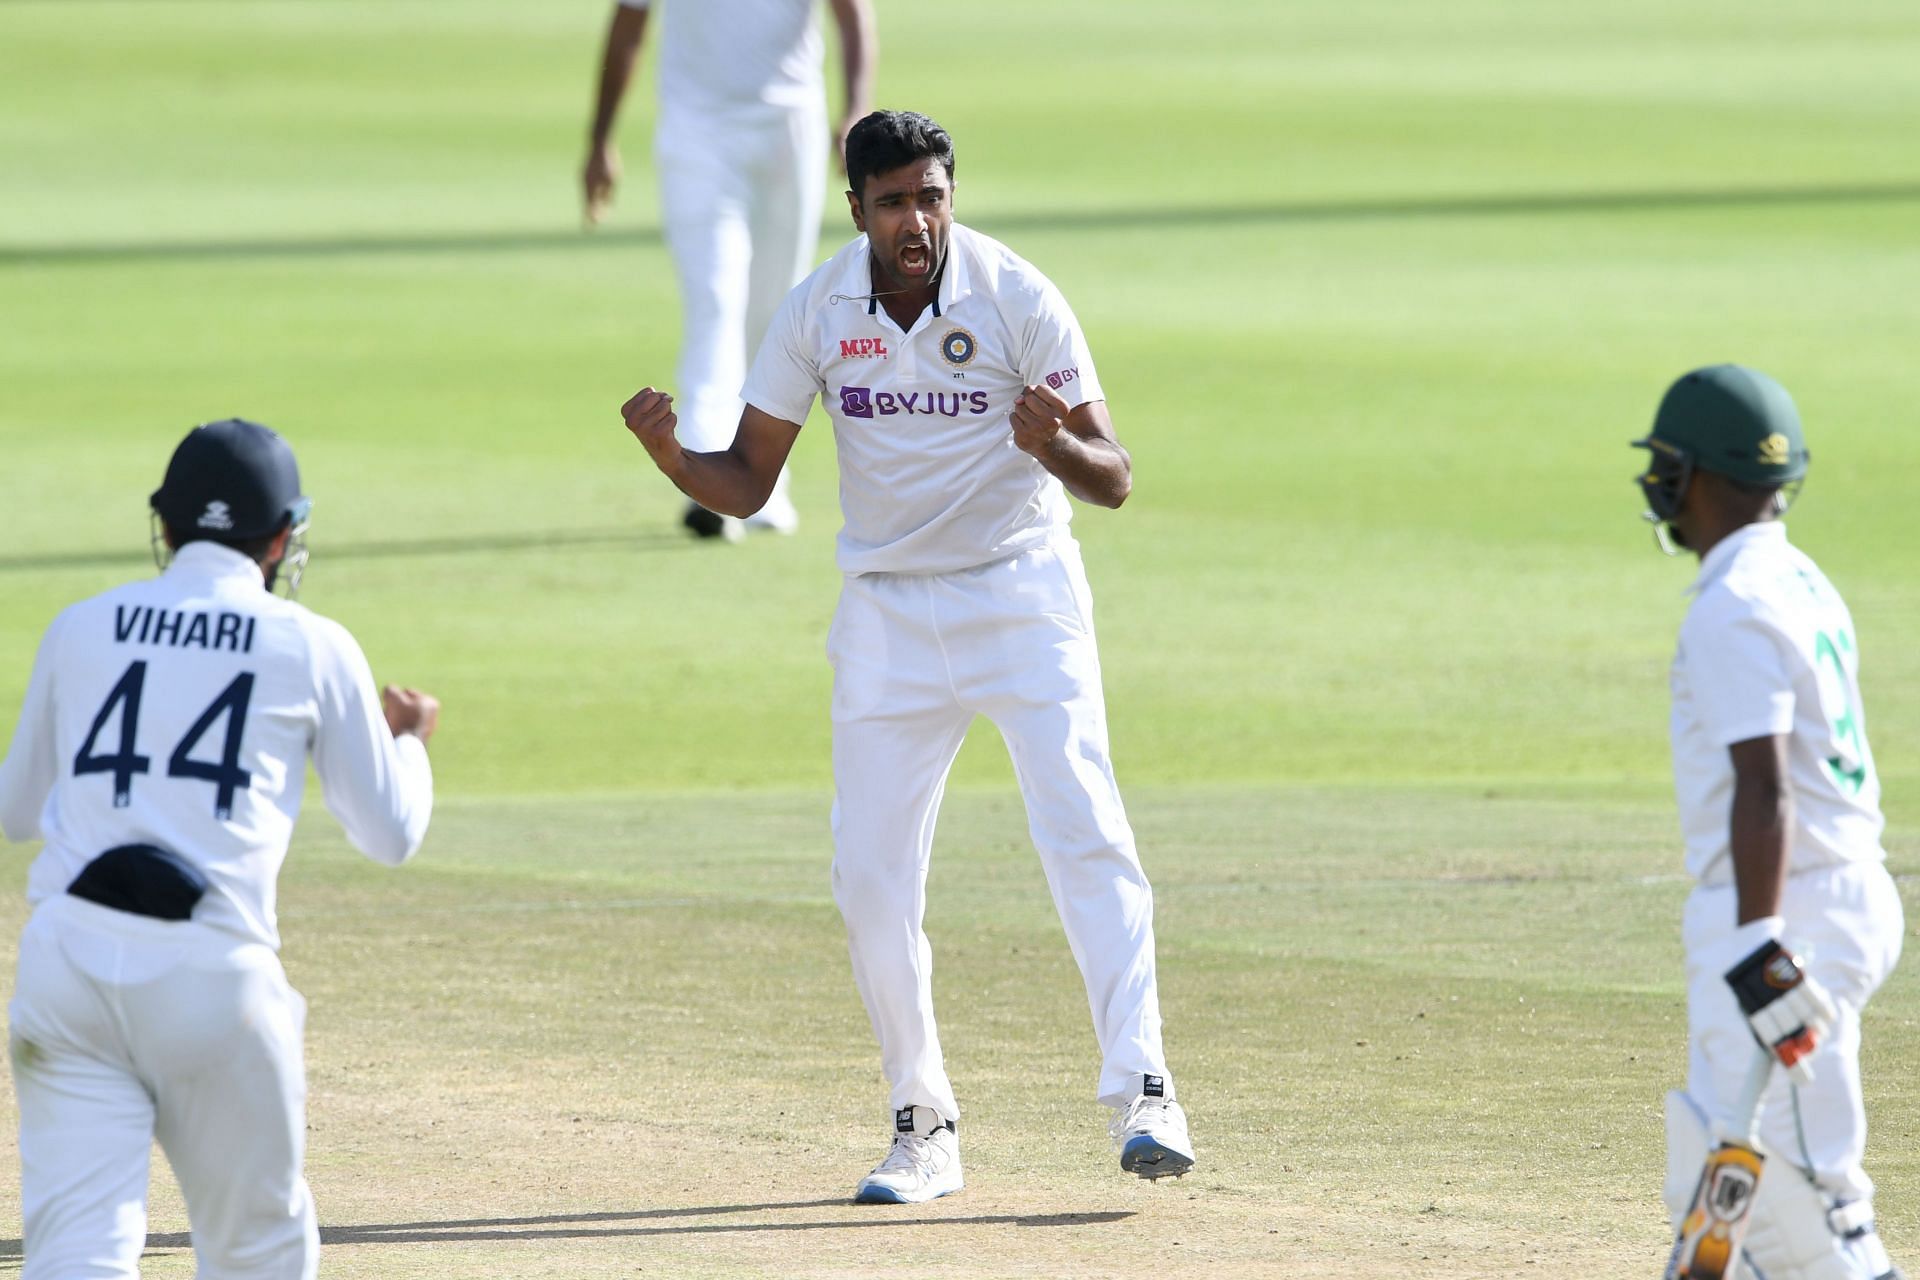 Ravichandran Ashwin became the second highest wicket taker in Tests for India in the first Test at Mohali